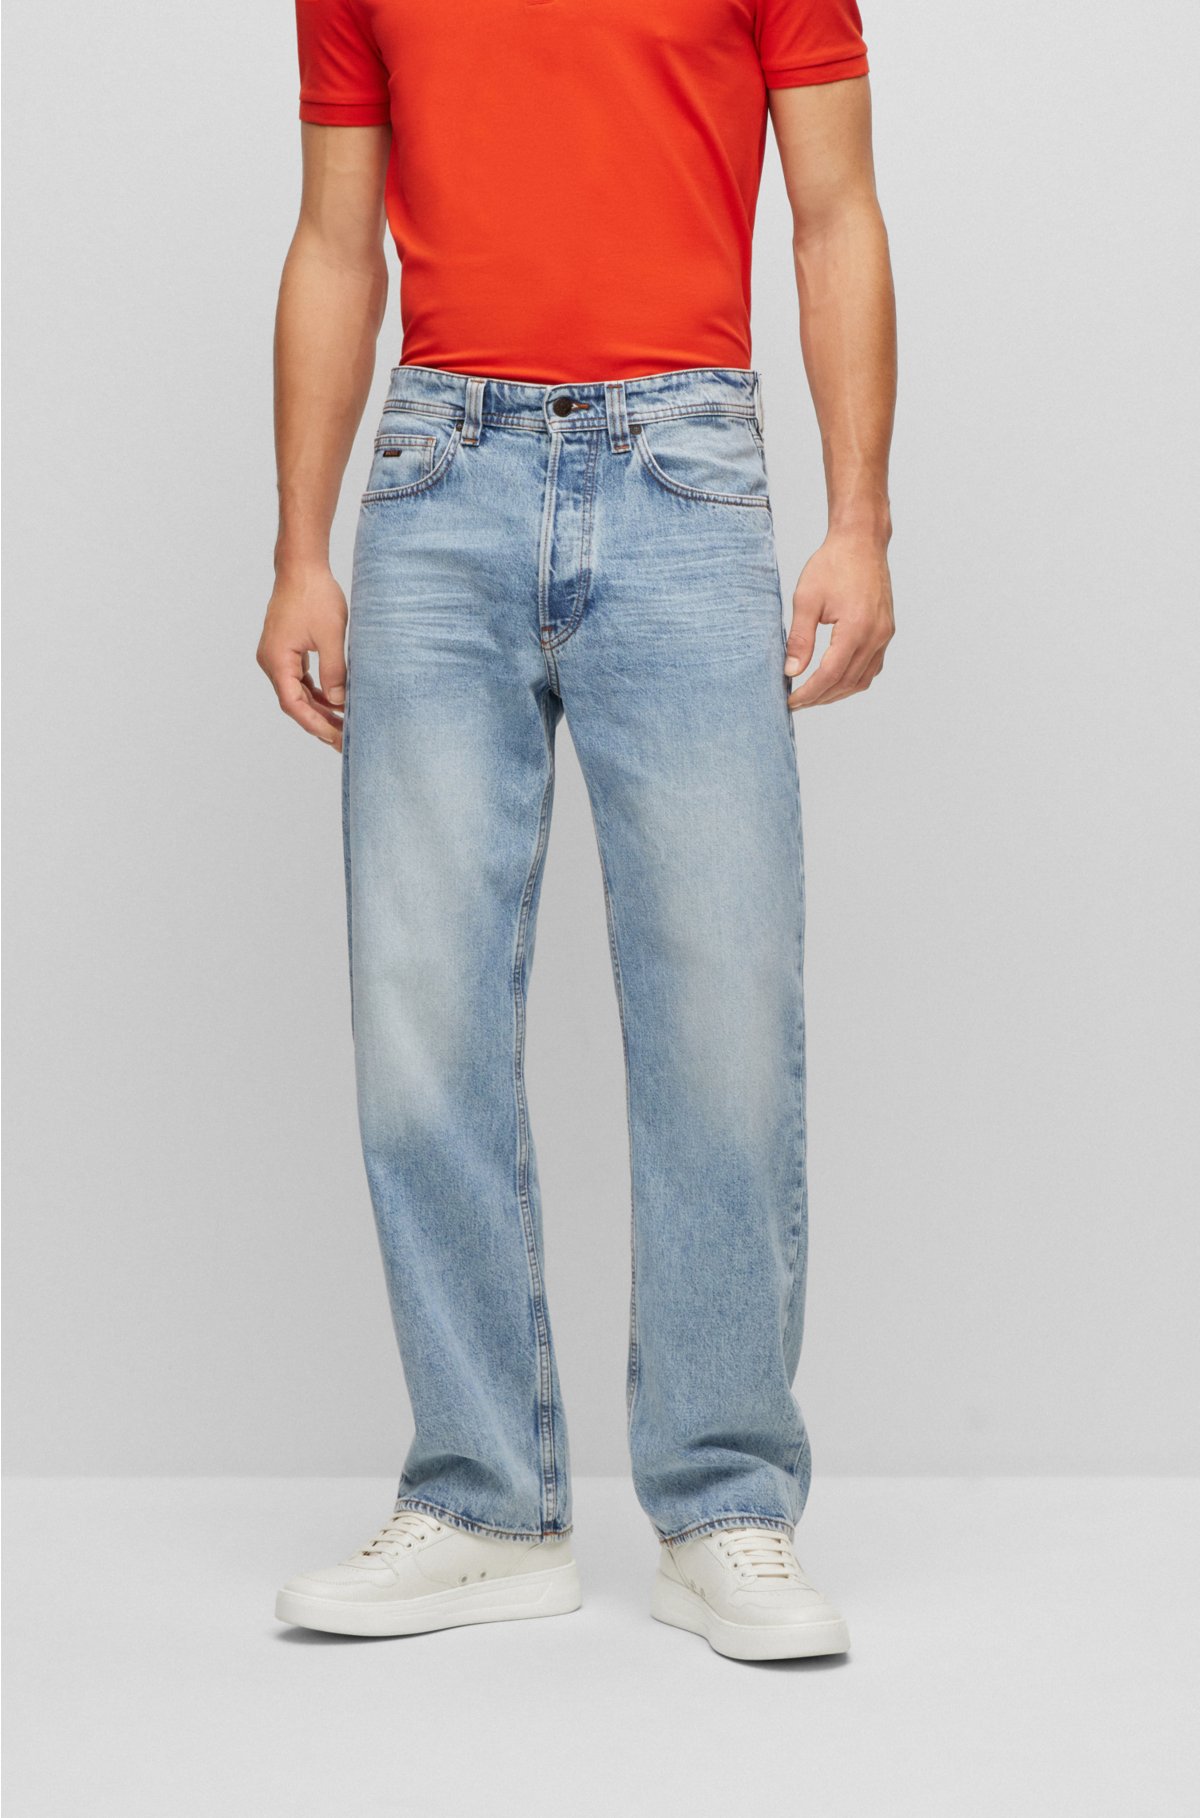 dessert Christchurch adelig BOSS - Relaxed-fit jeans in stonewashed blue denim